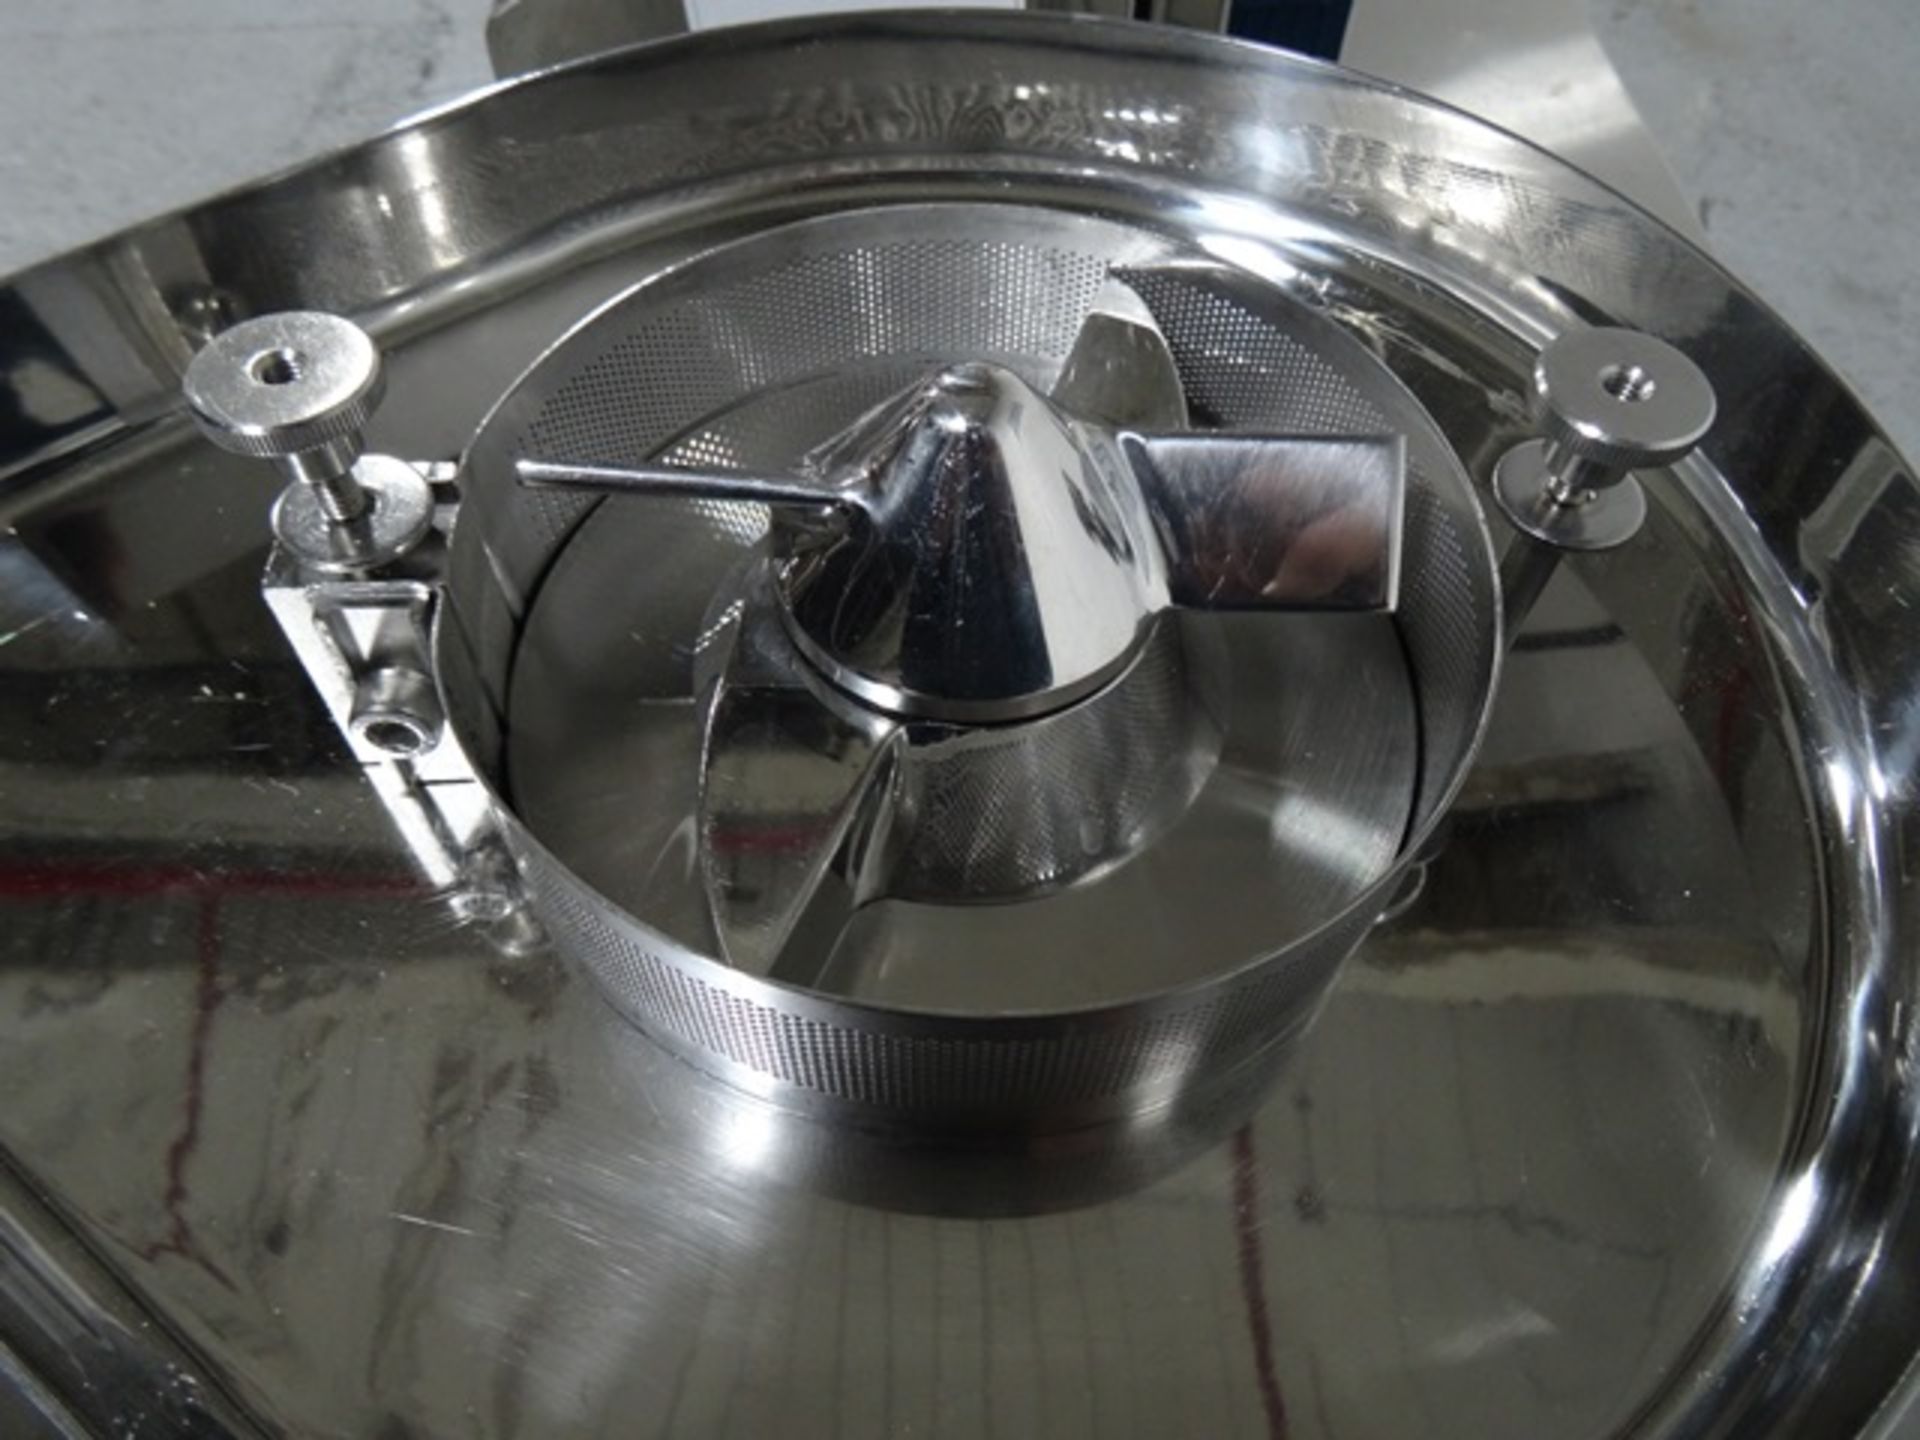 Fuji Paudal LCI Basket Granulator, model BR-150, stainless steel construction, with feed hopper, - Image 8 of 21